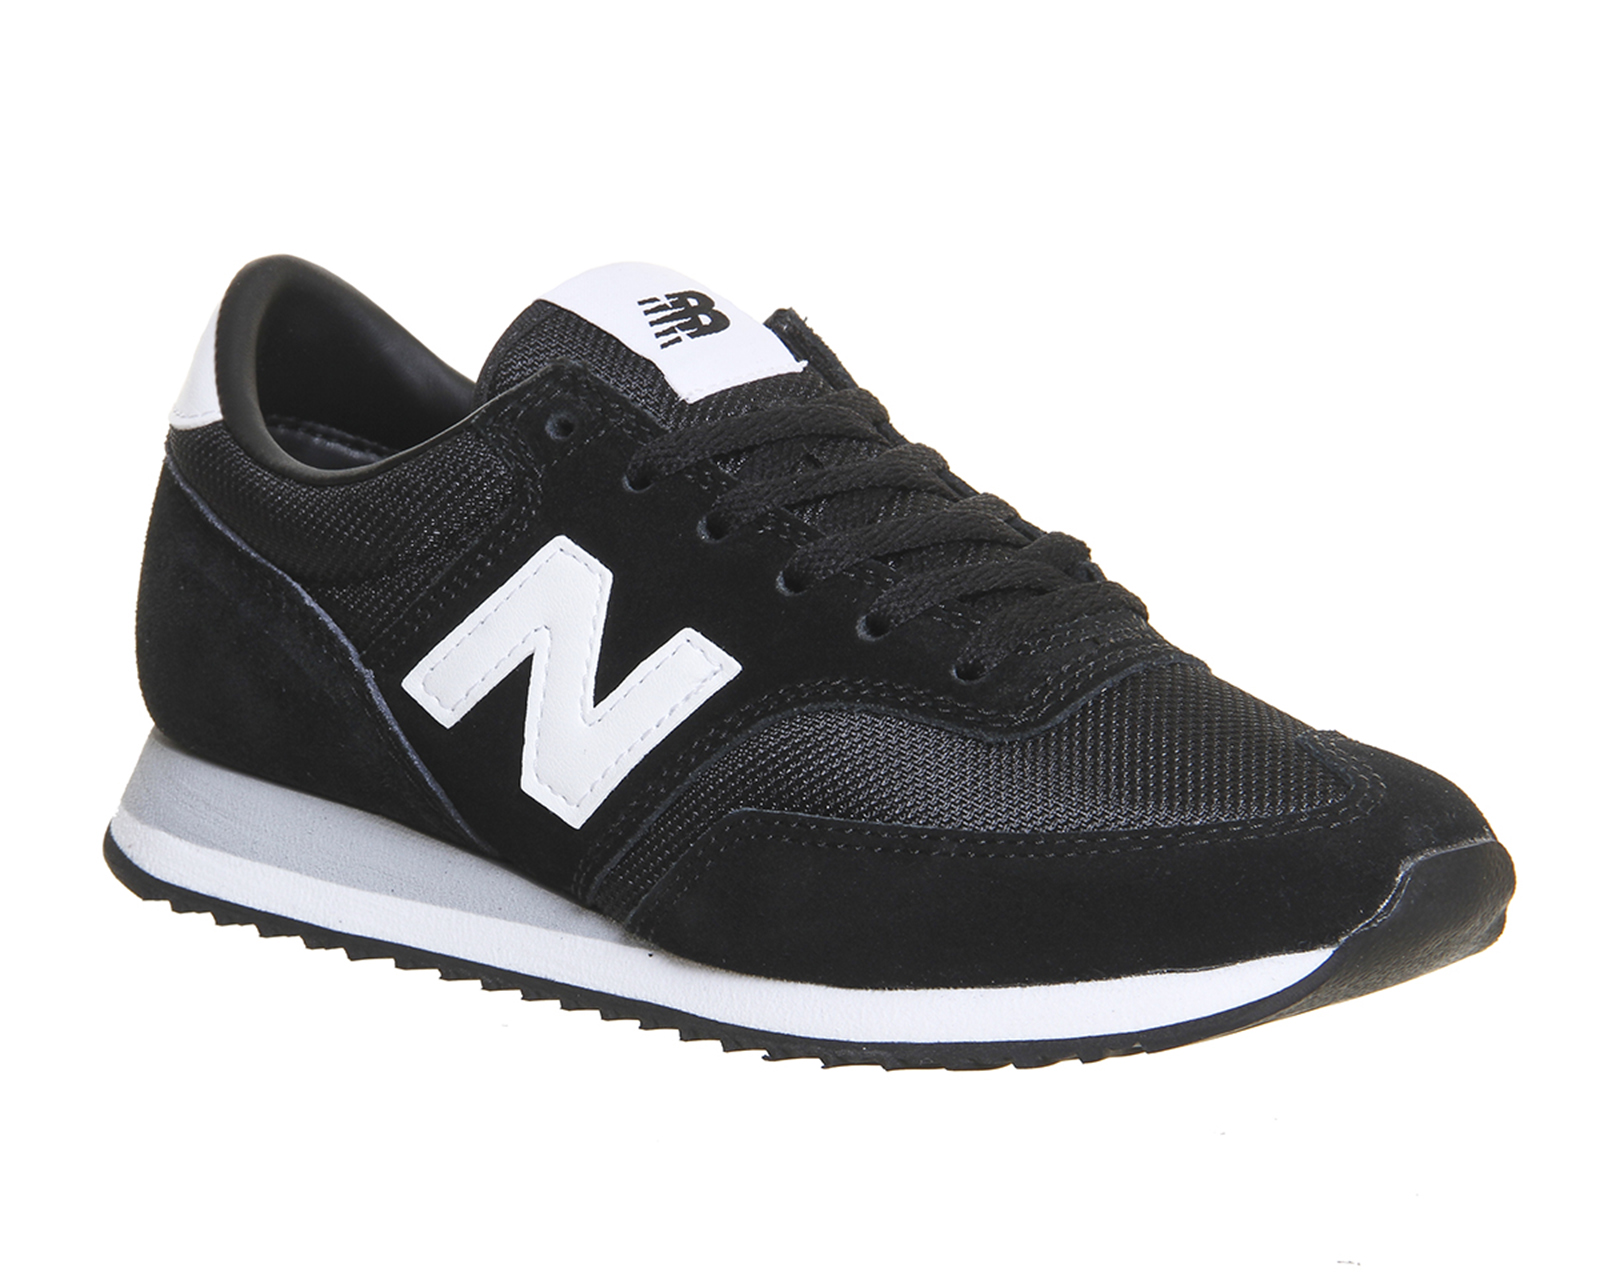 New Balance620 TrainersCw Black White Grey Exclusive